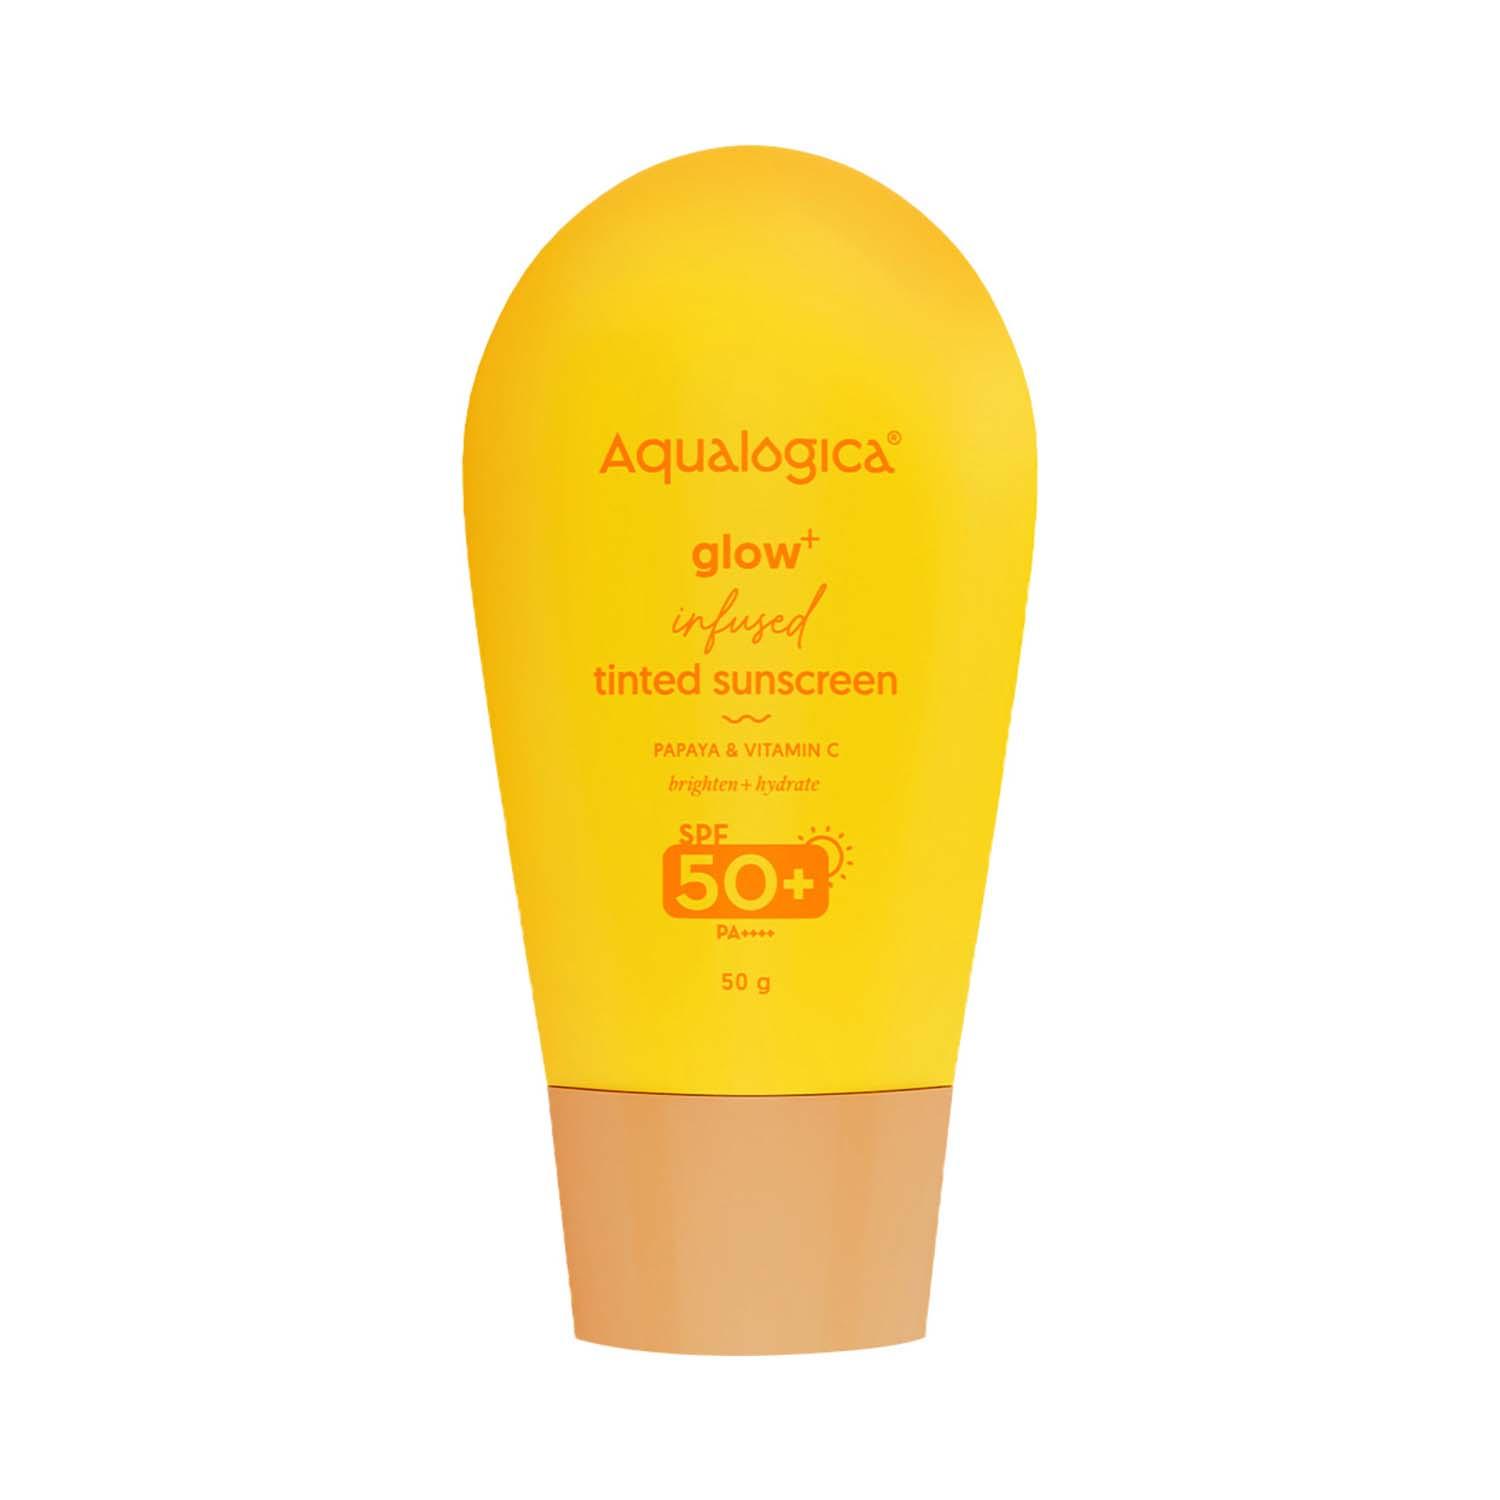 Aqualogica Glow+ Infused Tinted Sunscreen With SPF 50+ PA++++ (50 g)